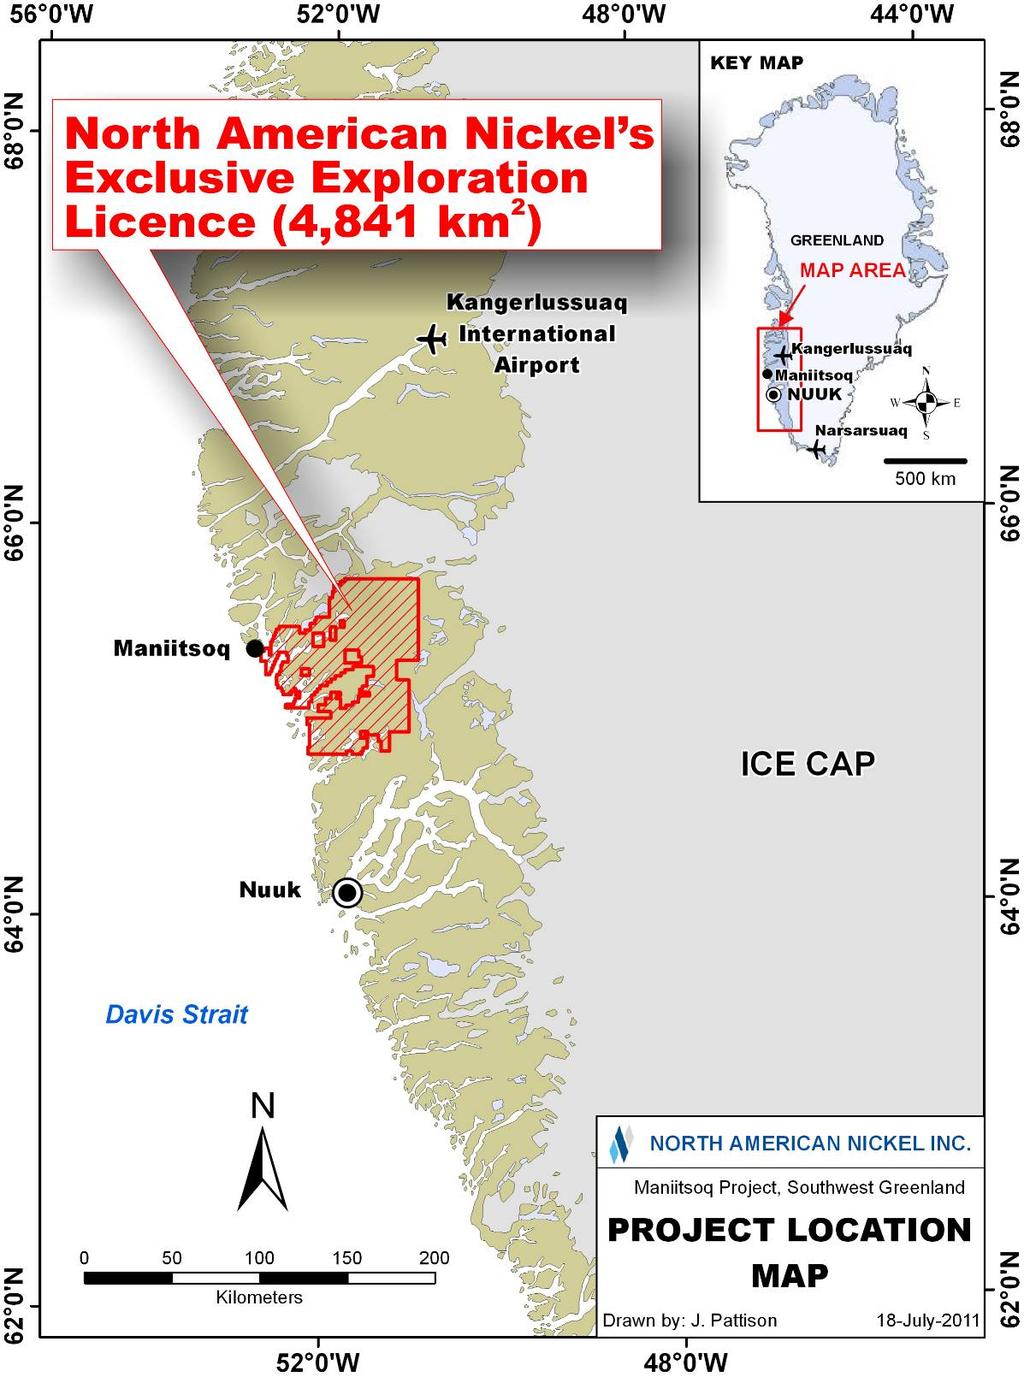 Figure 1: The Maniitsoq project is located along the southwest coast of Greenland approximately 160 km